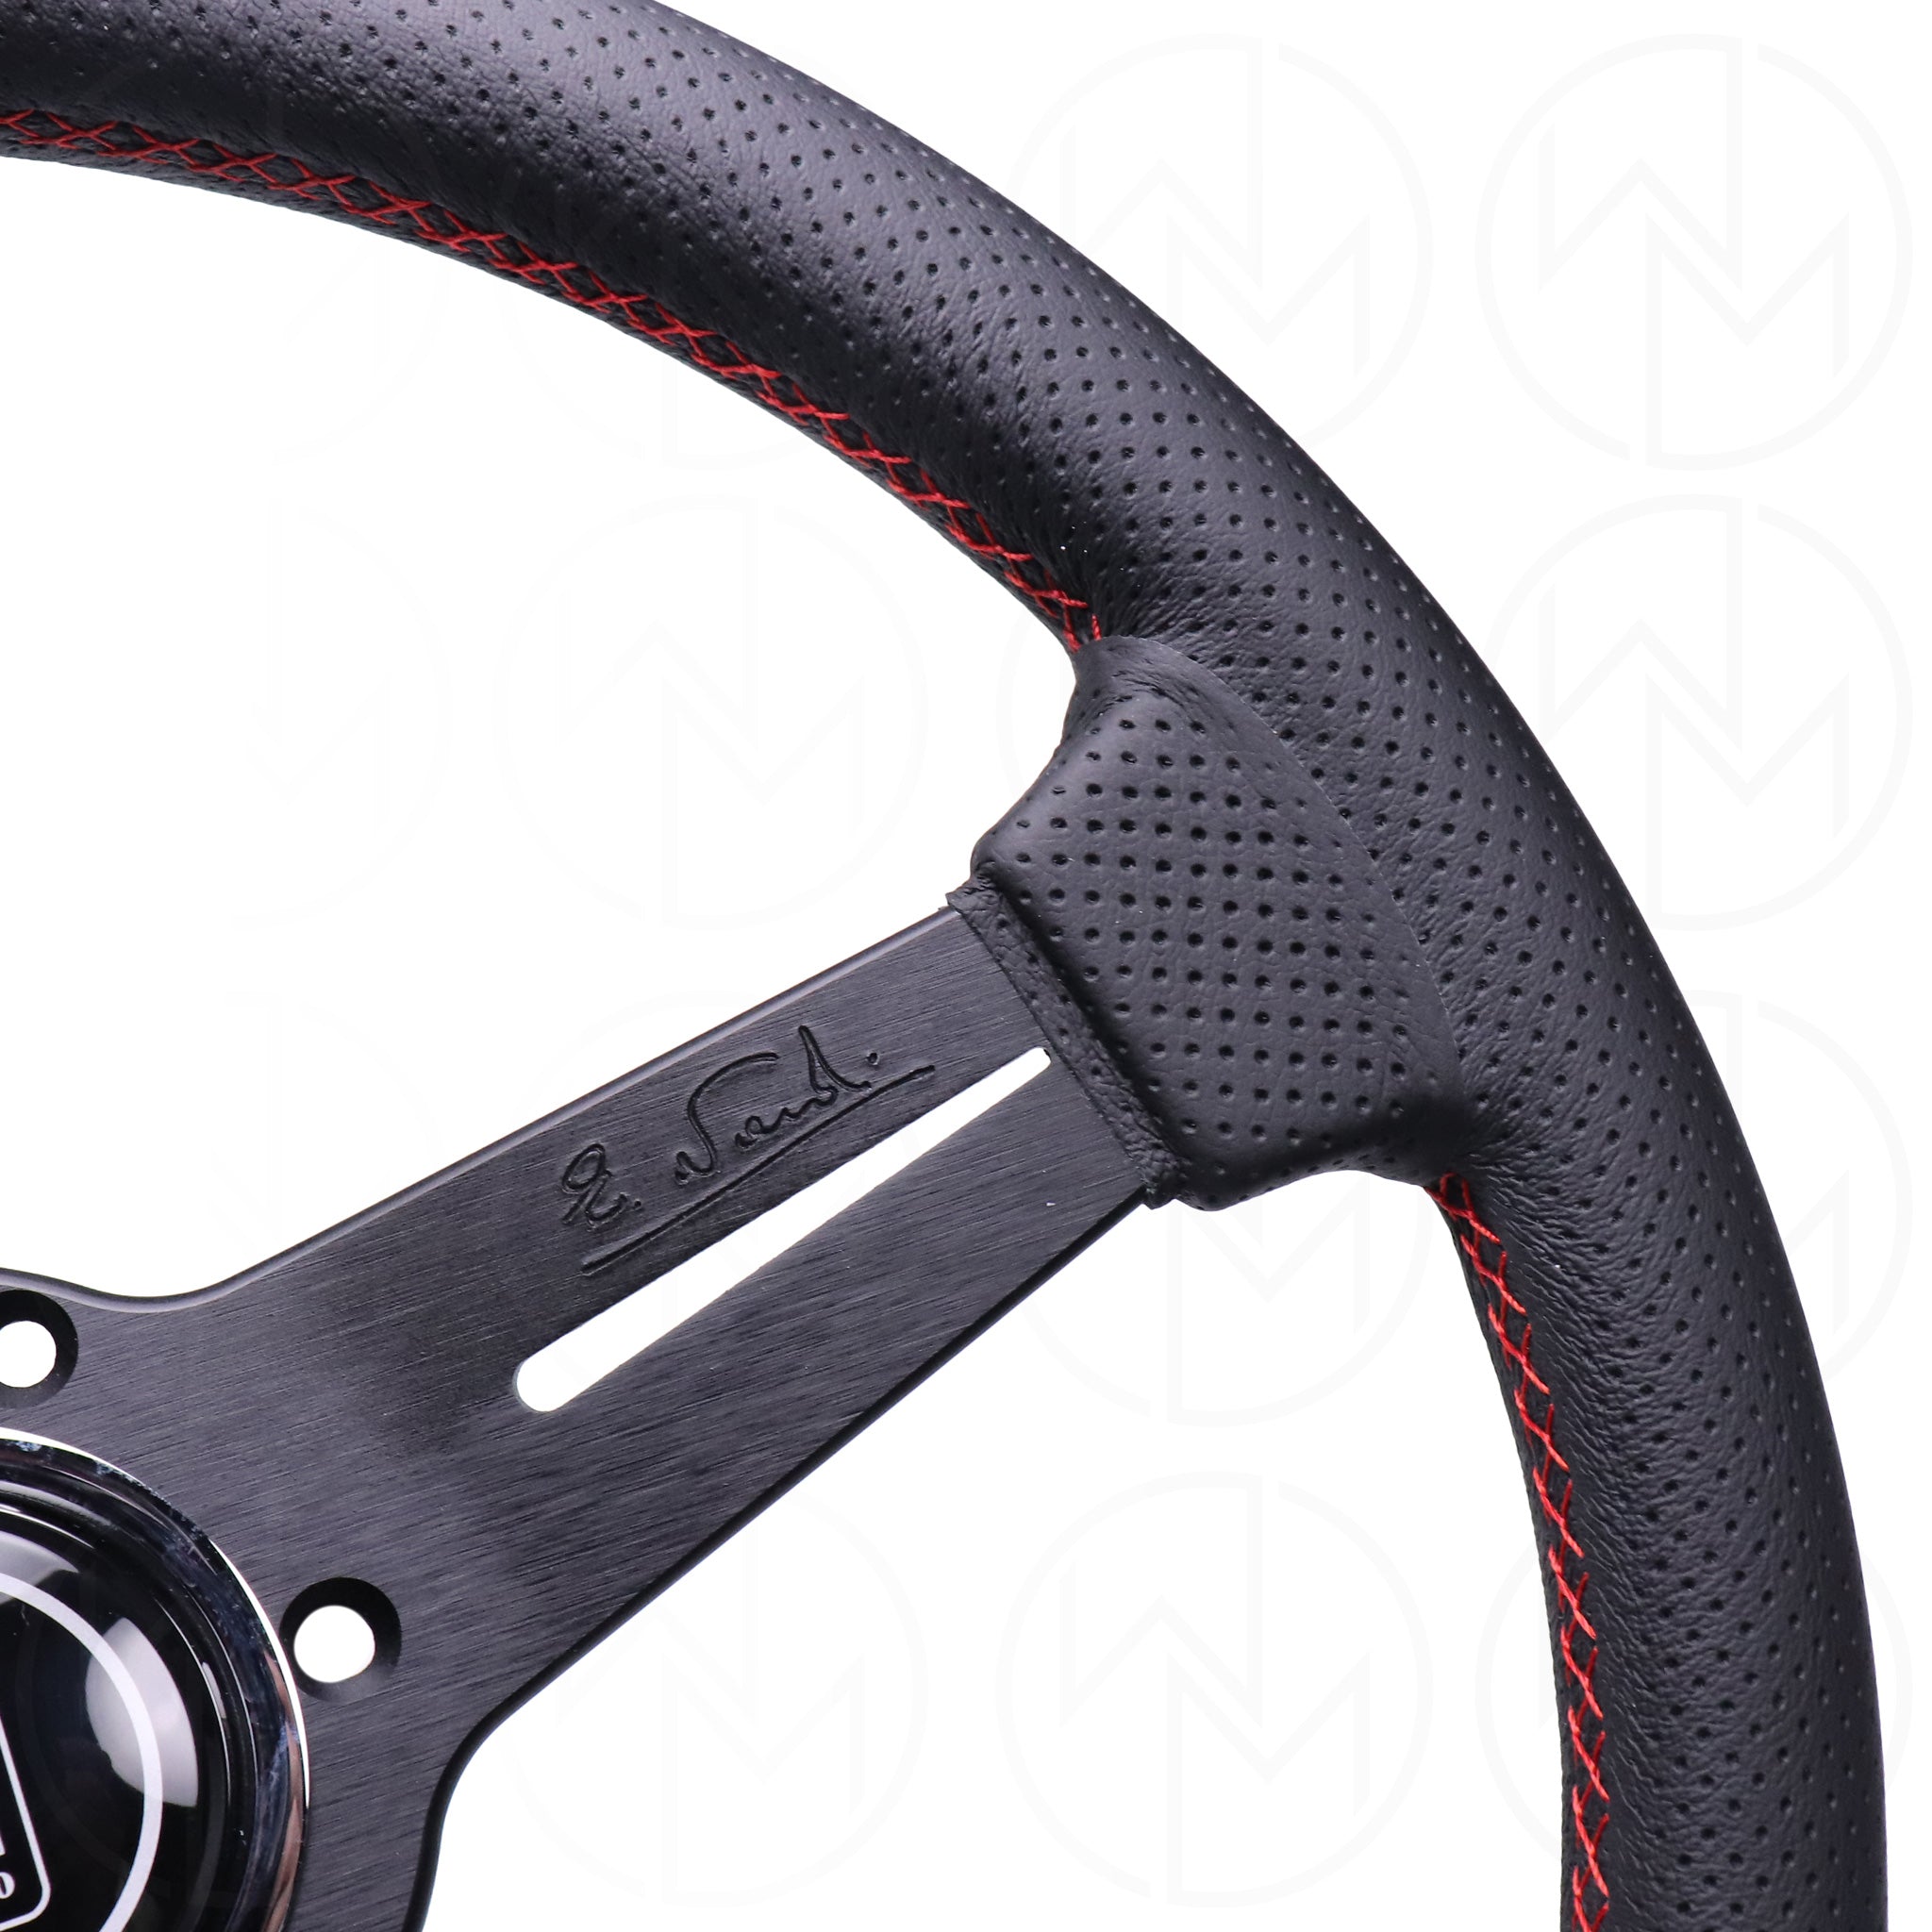 Nardi Classic Steering Wheel - 330mm Perforated Leather w/Red Stitch